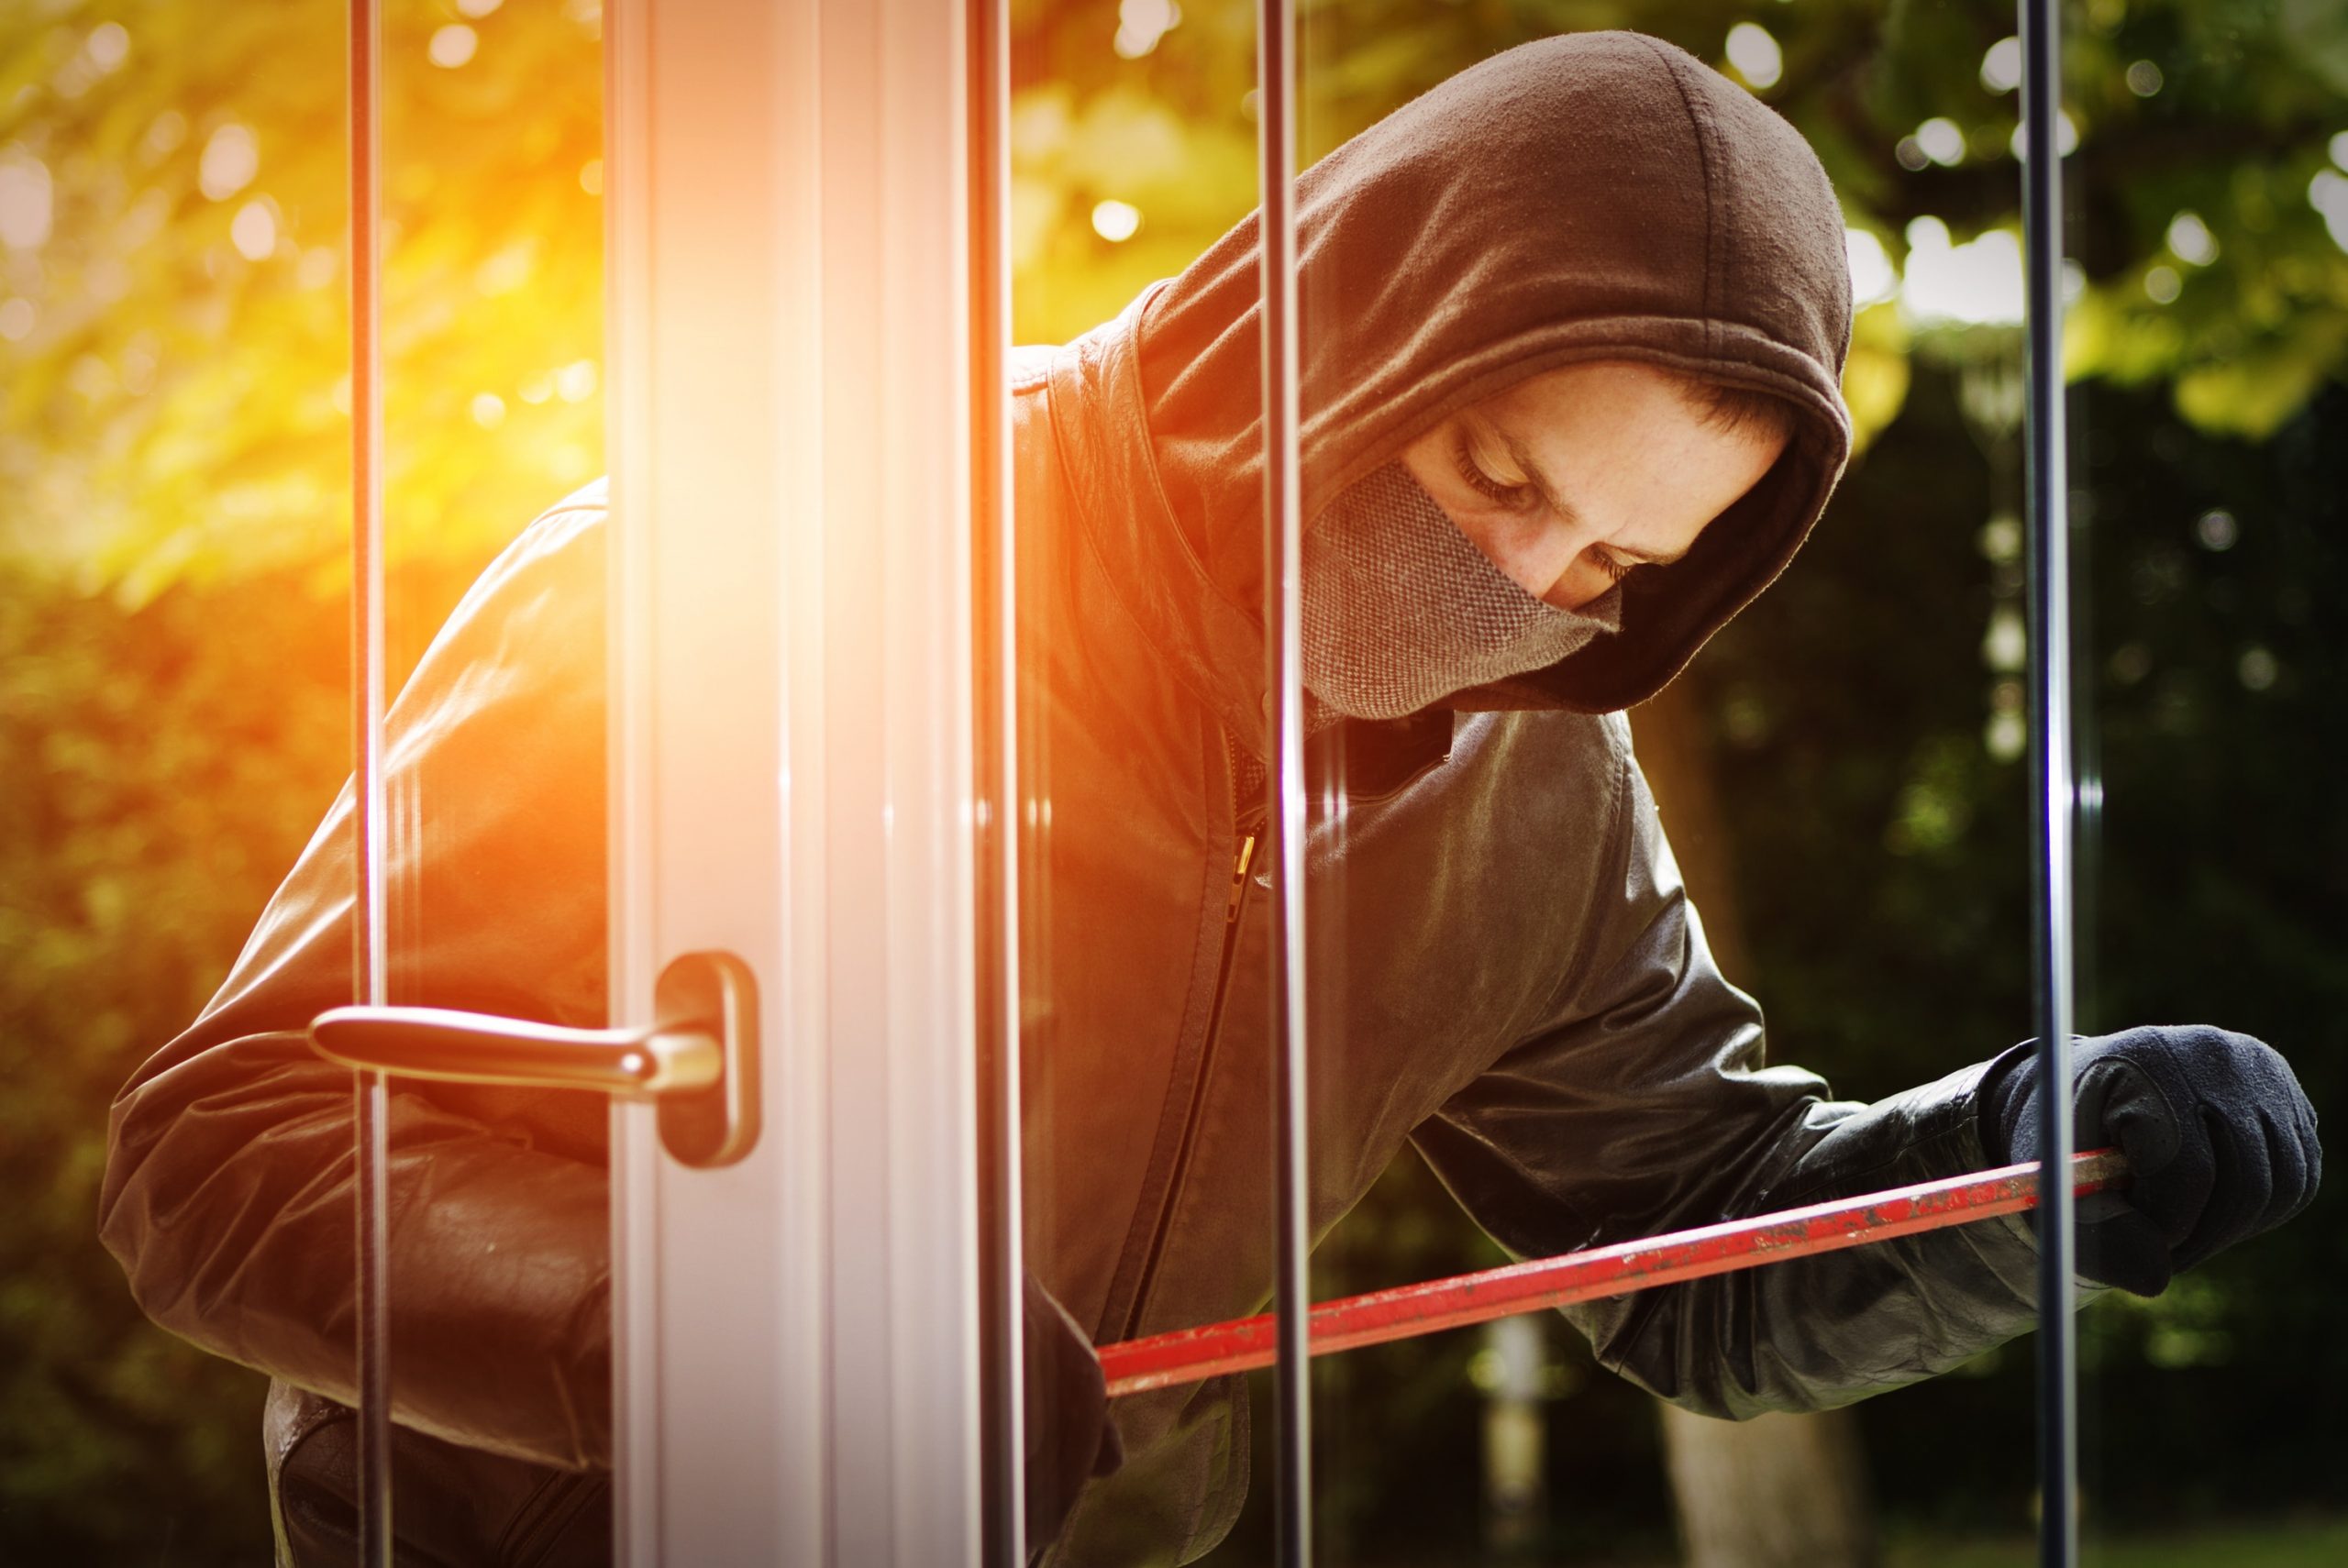 What Would You Do If Your Business Was Burgled or Robbed?